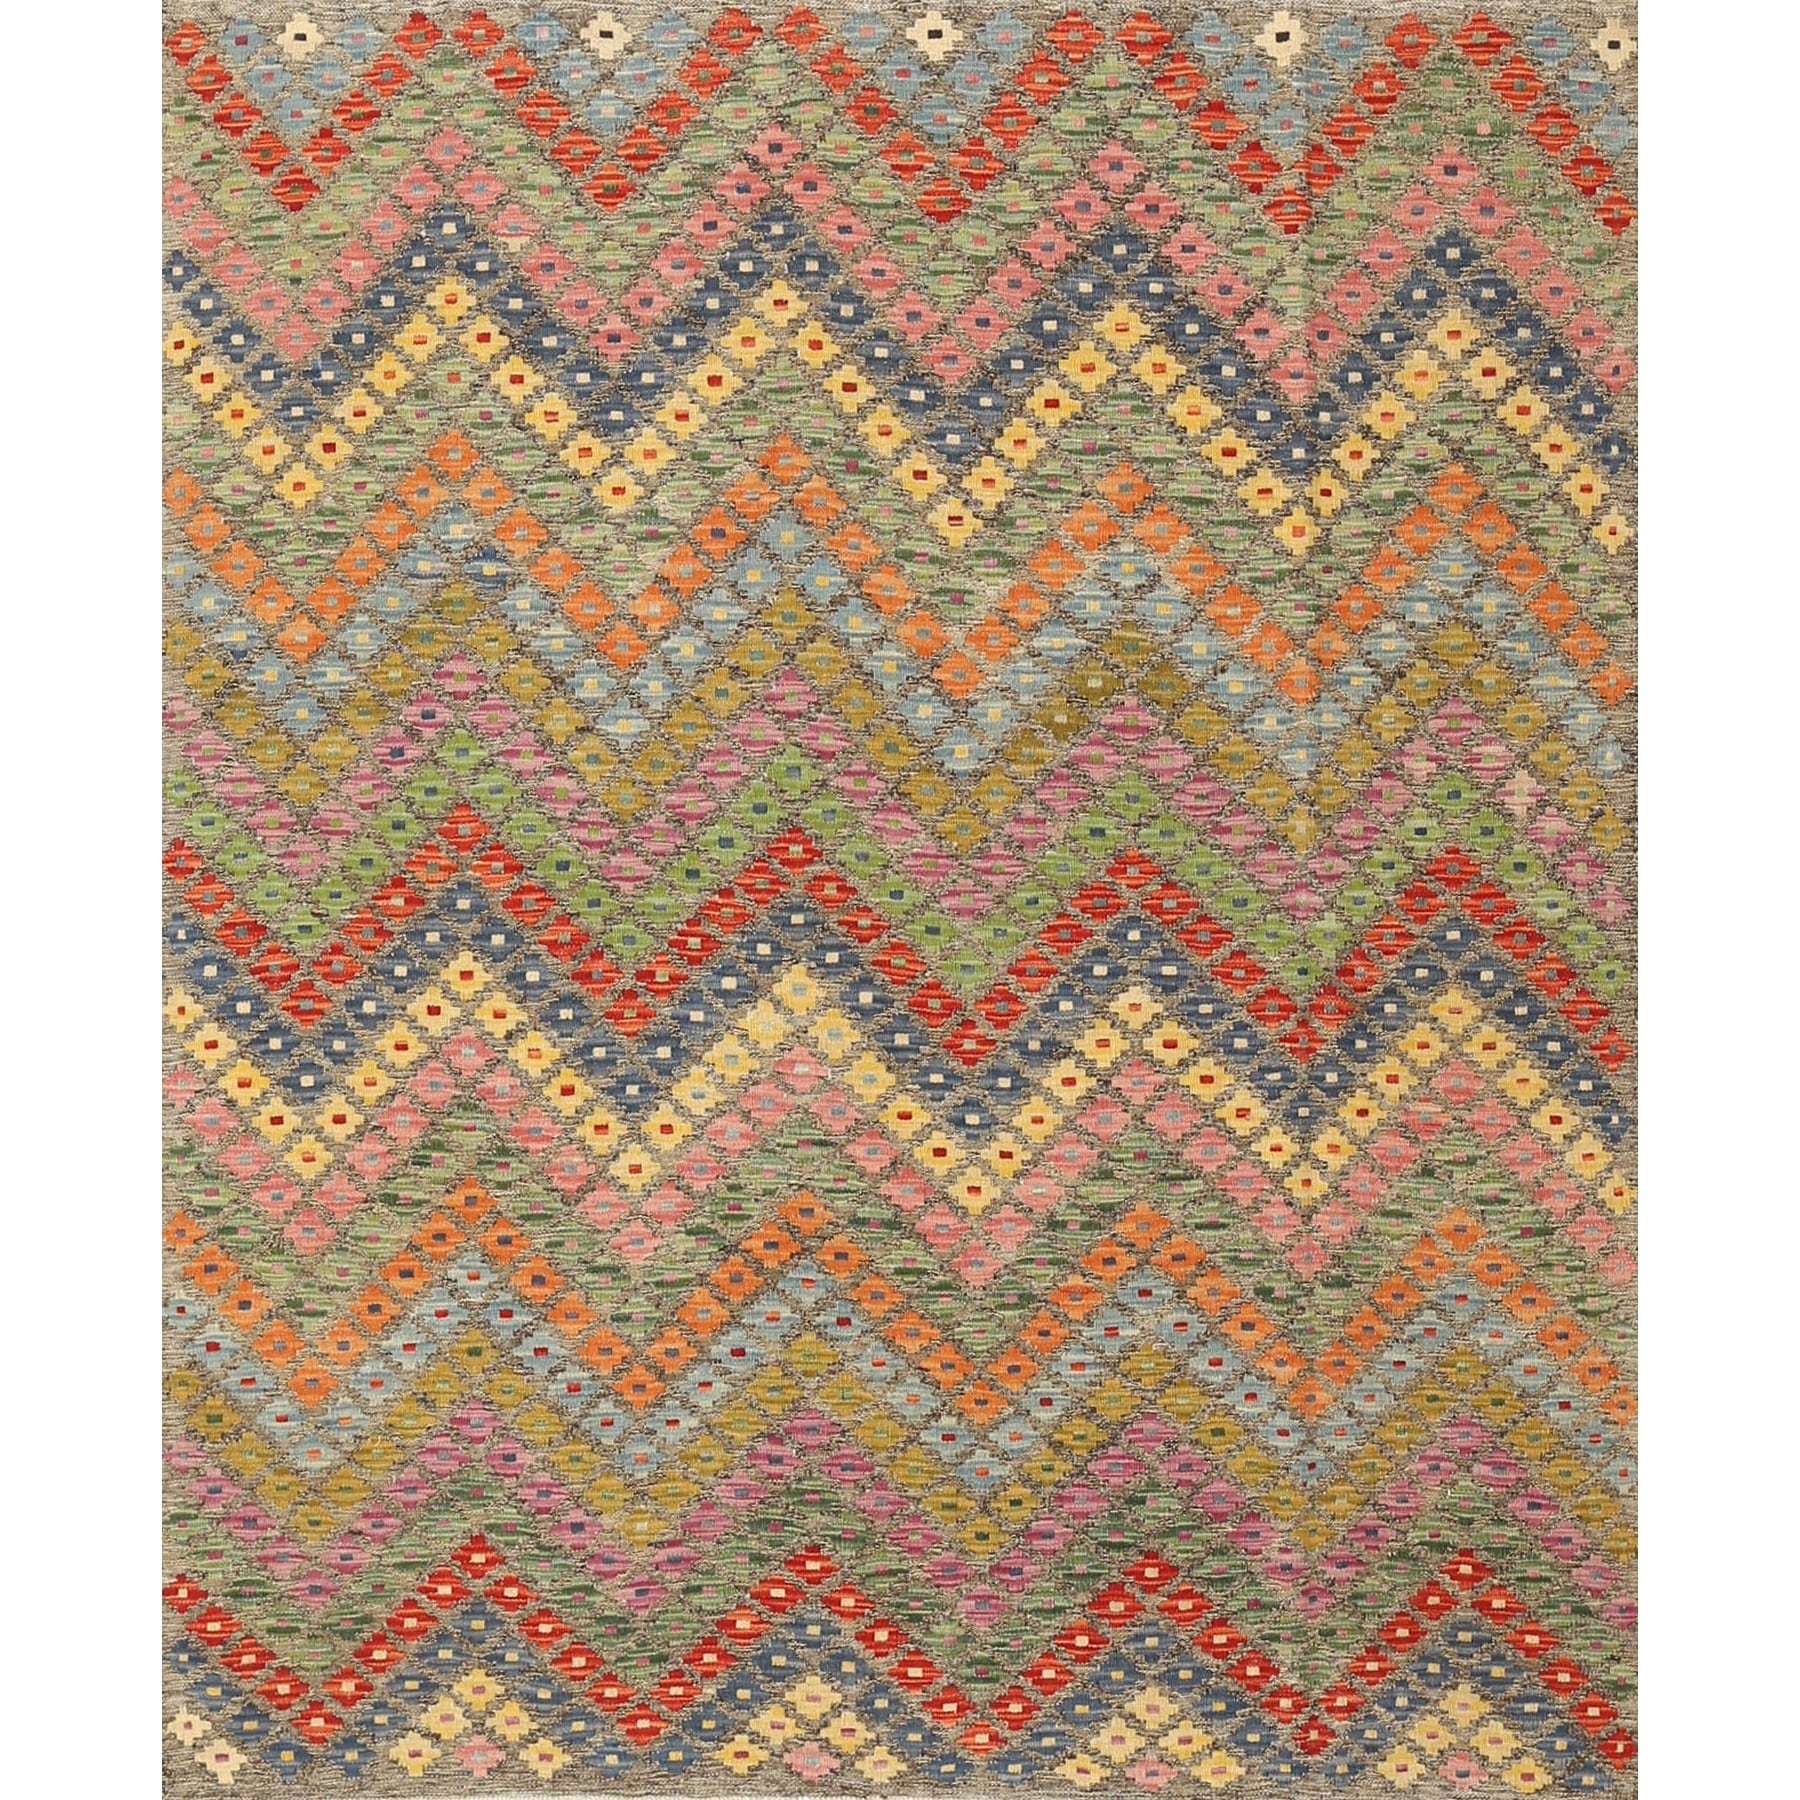 Ahgly Company Machine Washable Contemporary Sienna Brown Area Rugs